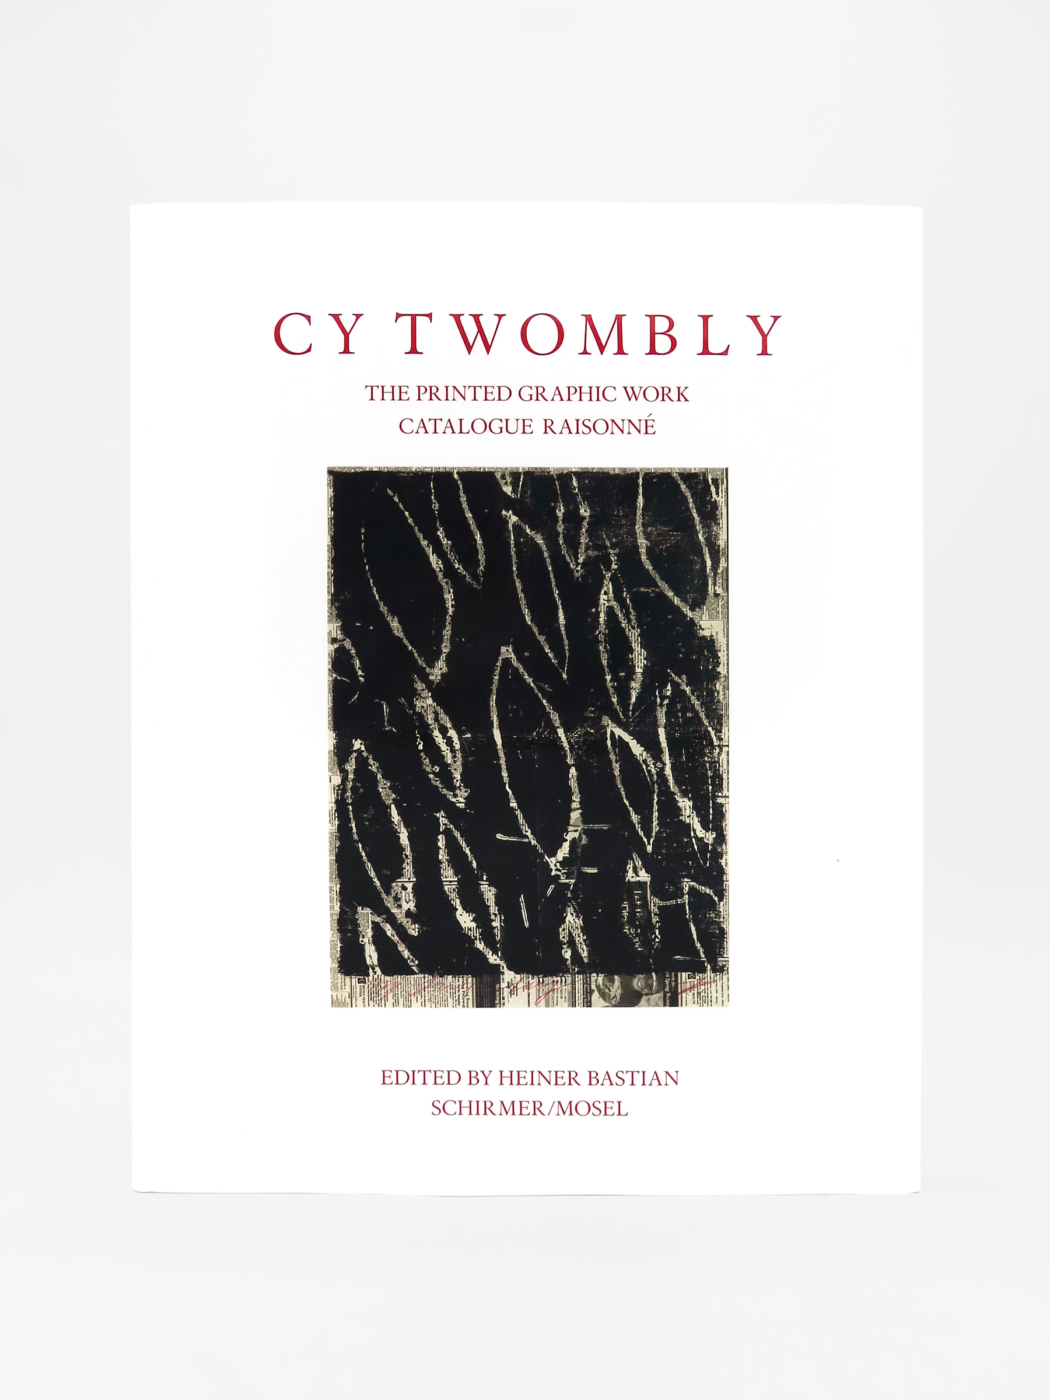 Cy Twombly, The Printed Graphic Work Catalogue Raisonné